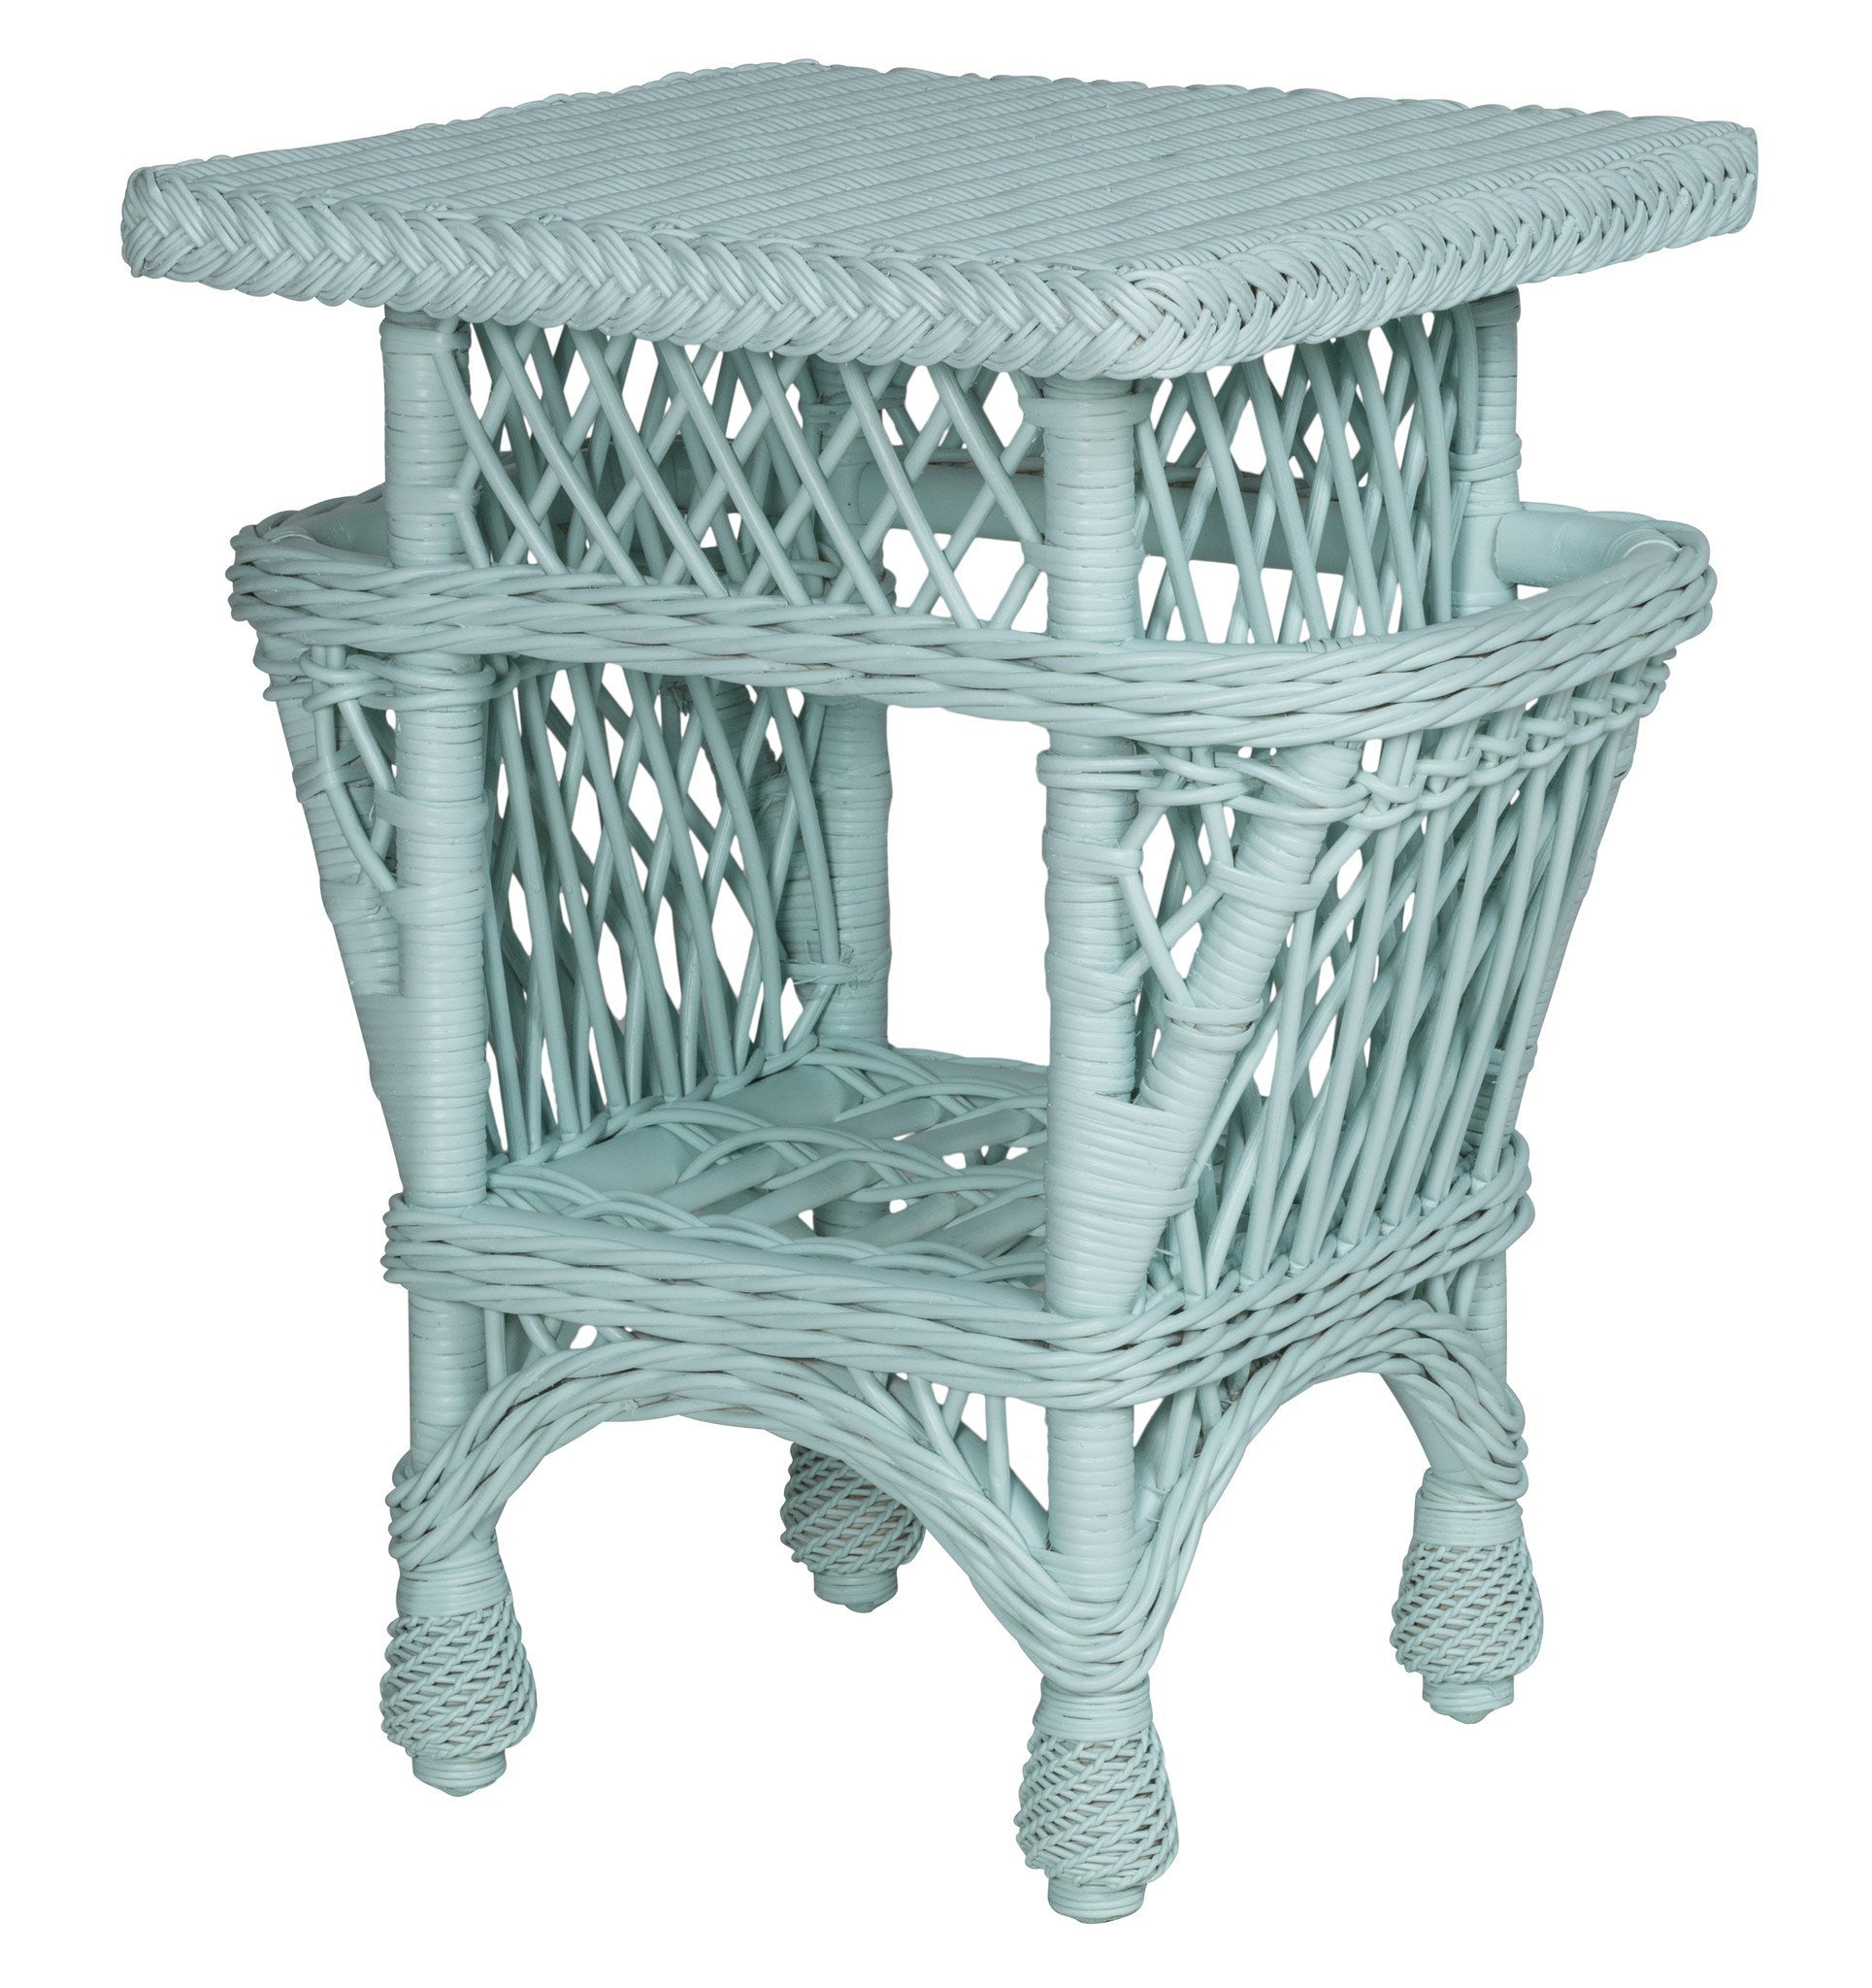 Designer Wicker & Rattan By Tribor Harbor Front Accent Table With Pockets Accessory - Rattan Imports